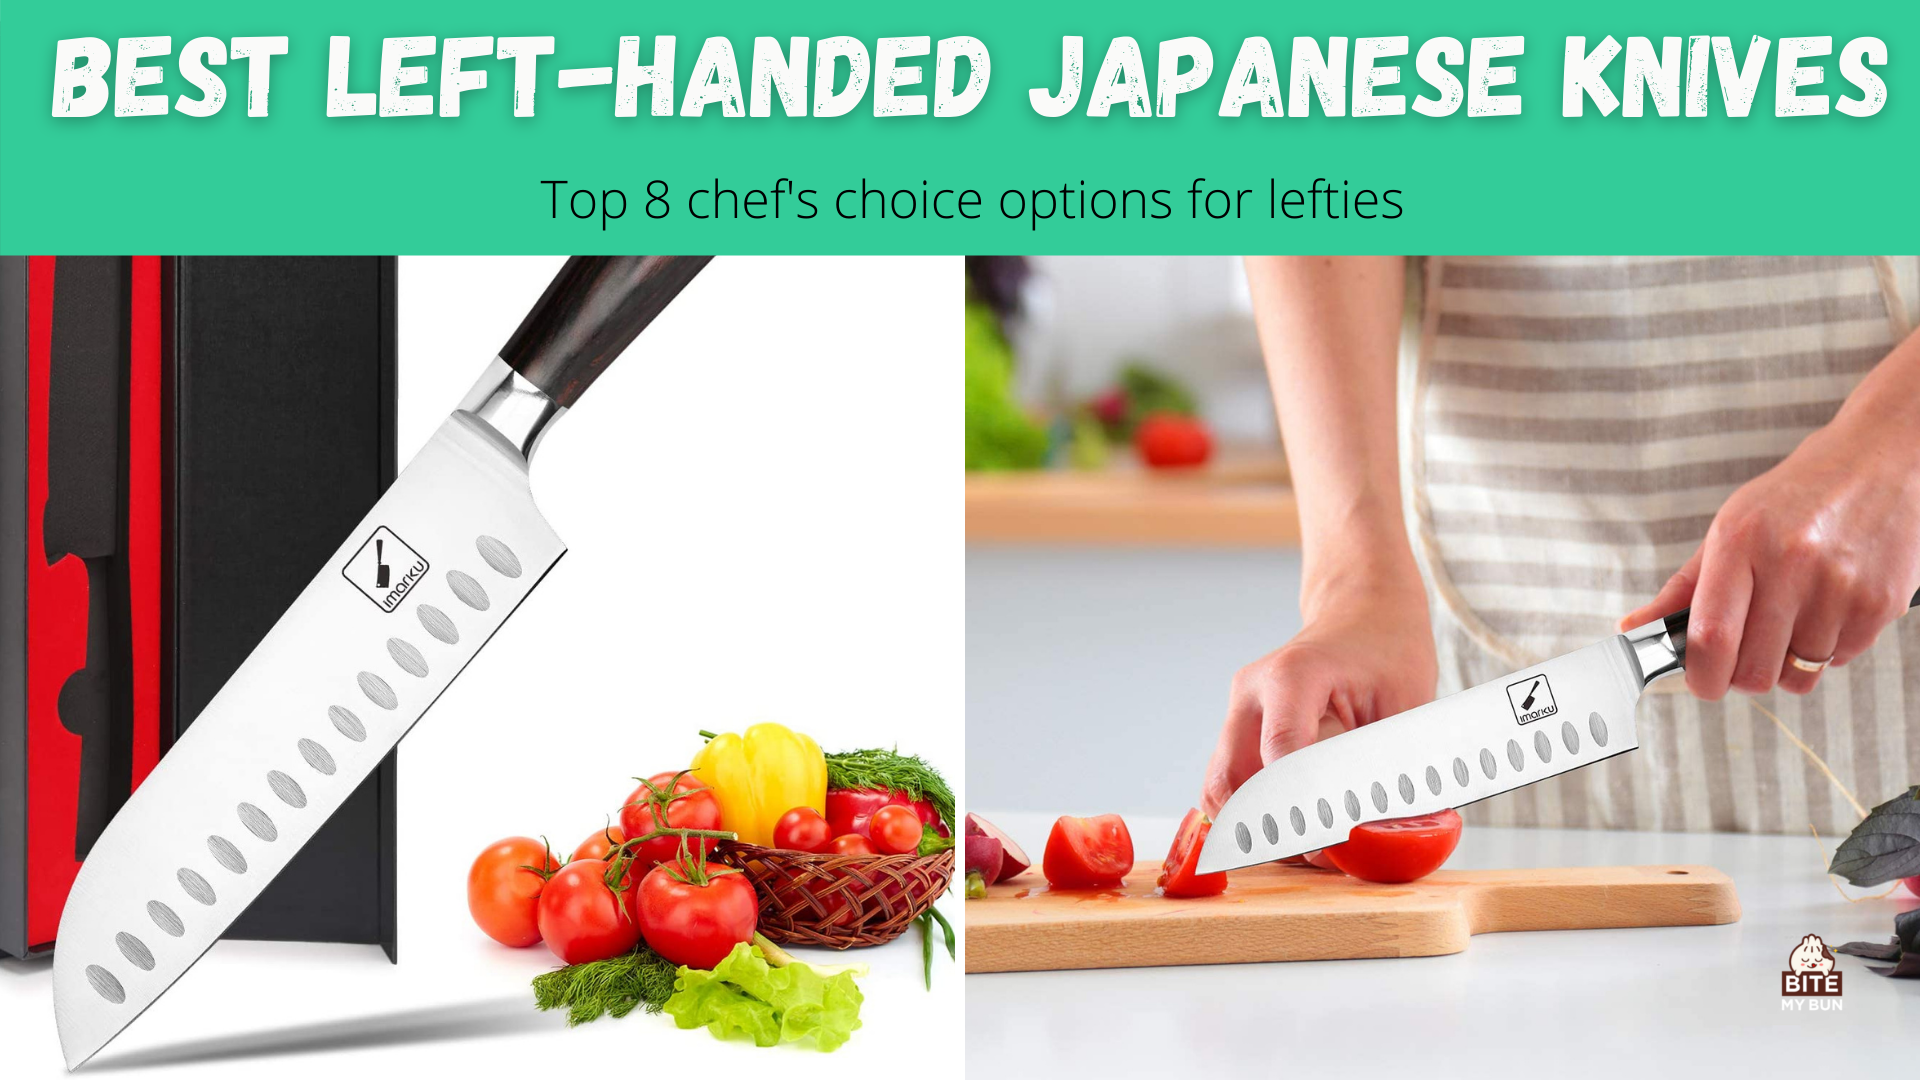 Best left-handed Japanese knives | Top 8 chef's choice options for lefties